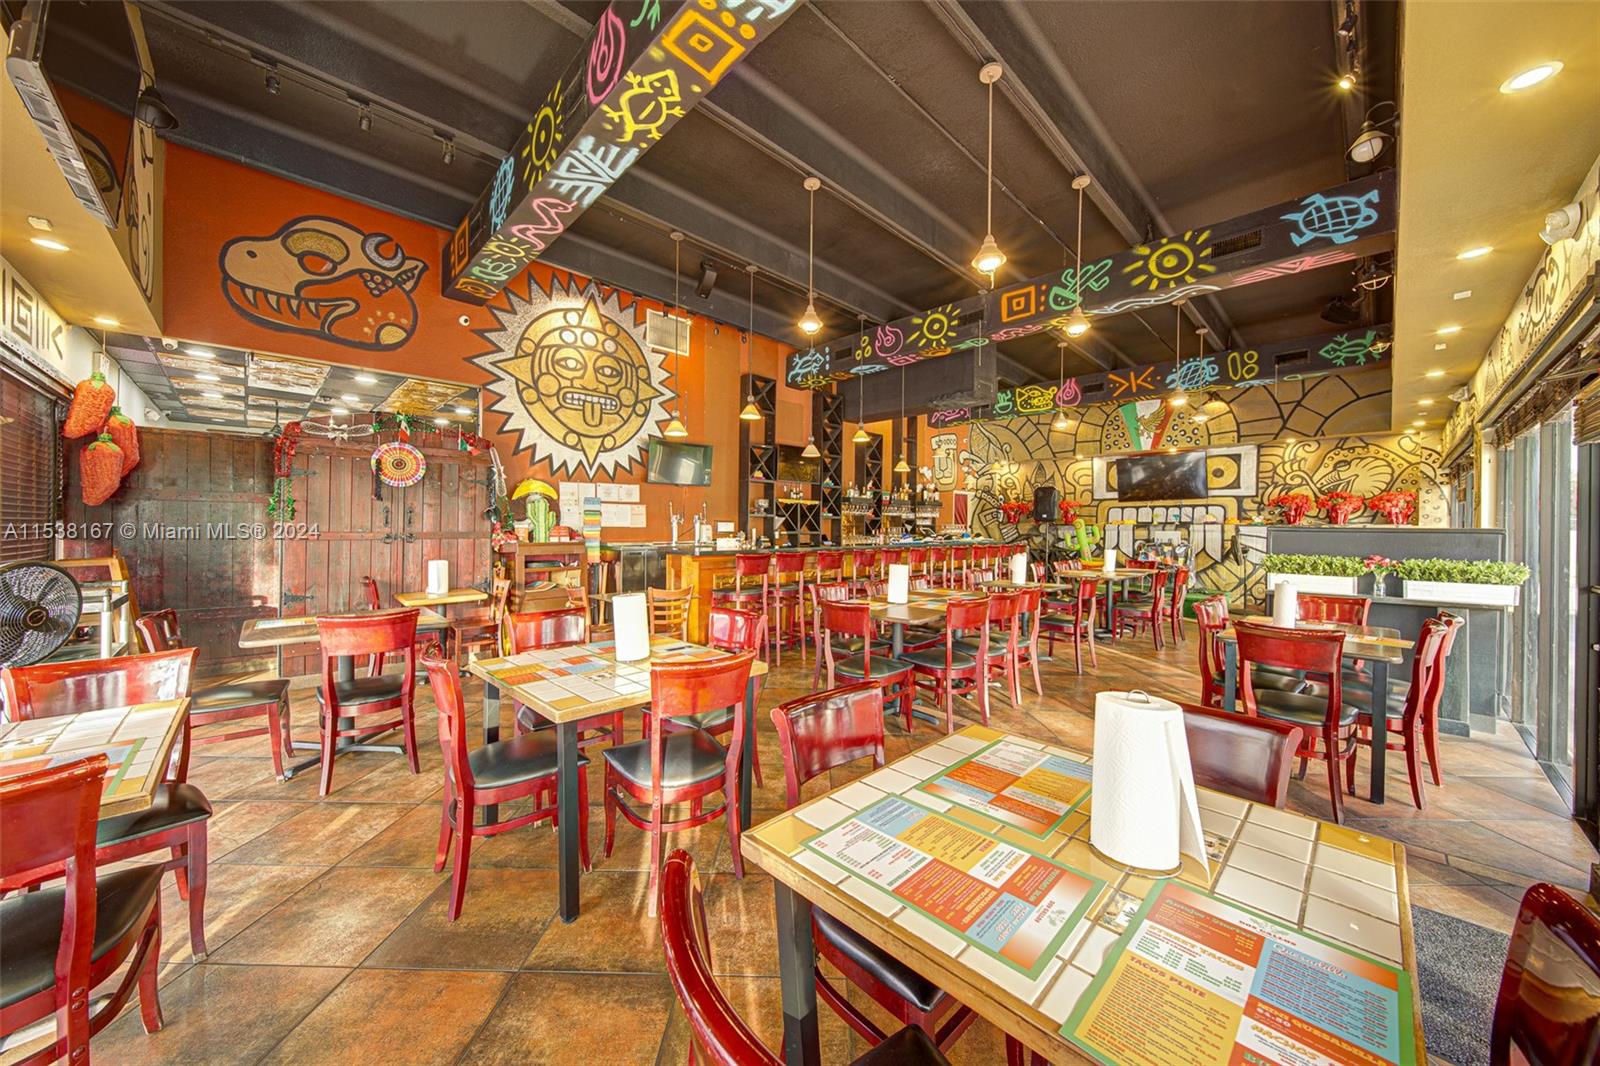 Mexican Restaurant For Sale in Kendall, Miami, FL 33196